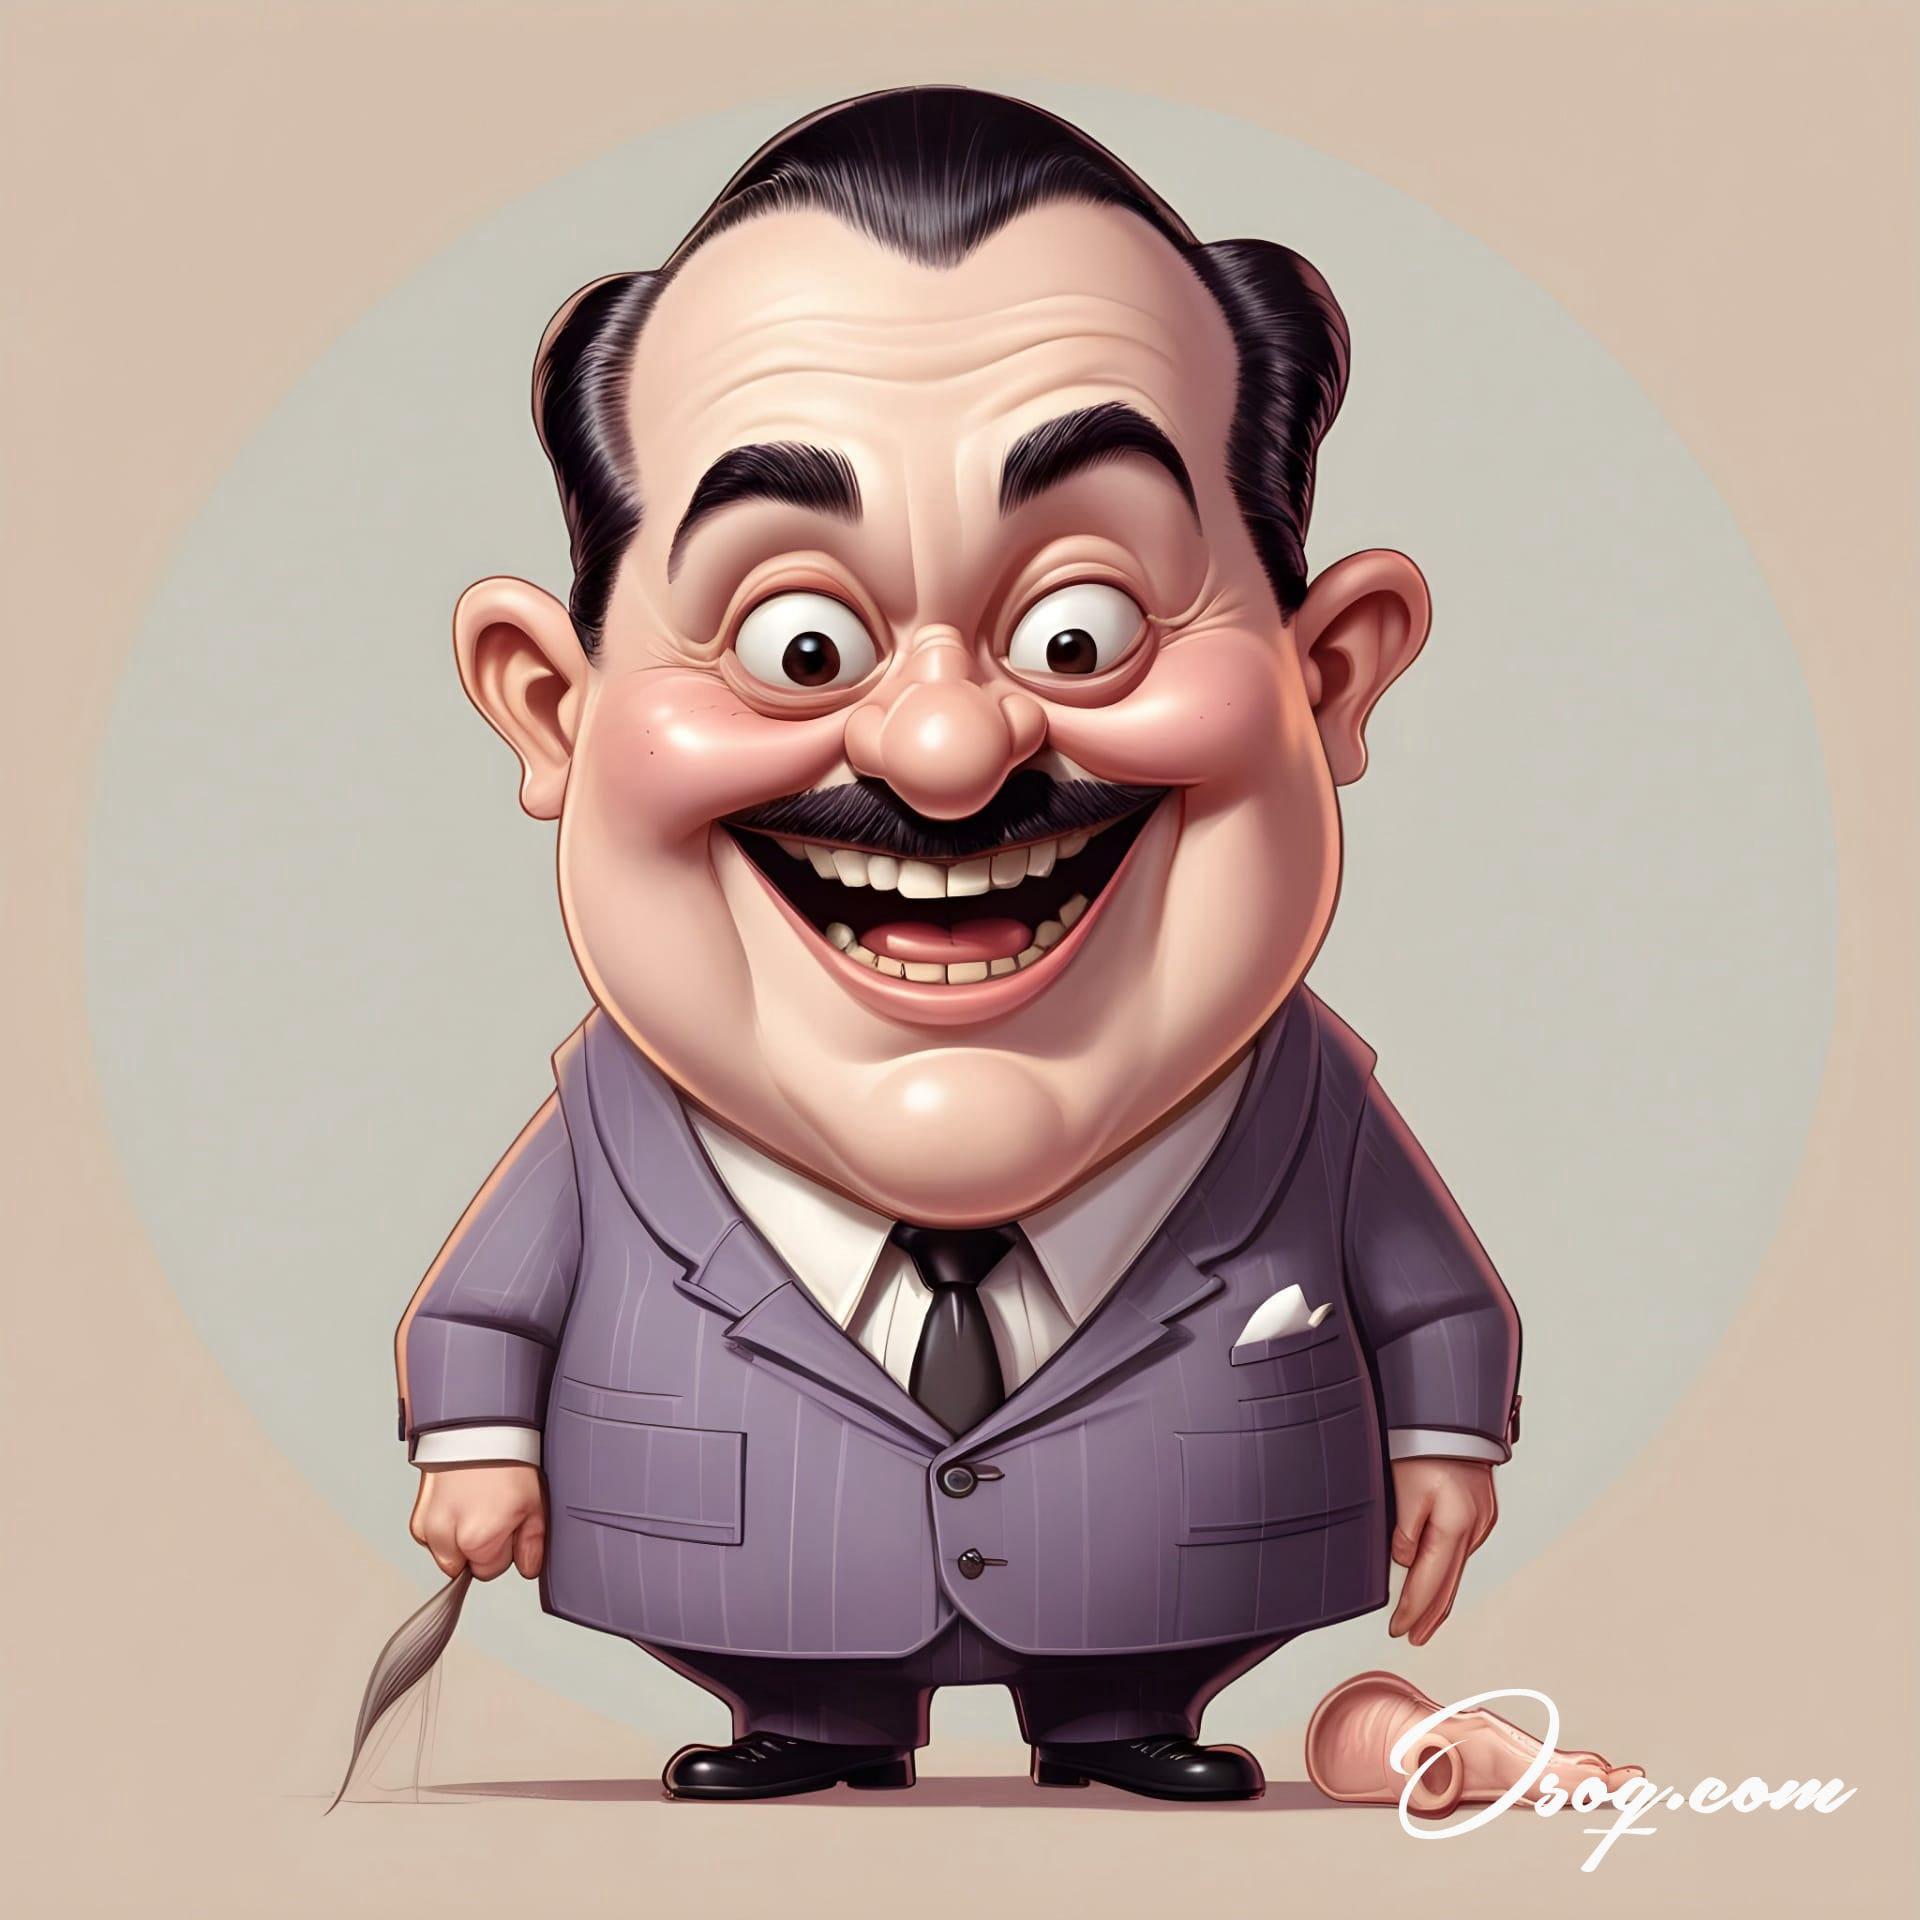 Addams family caricature 07